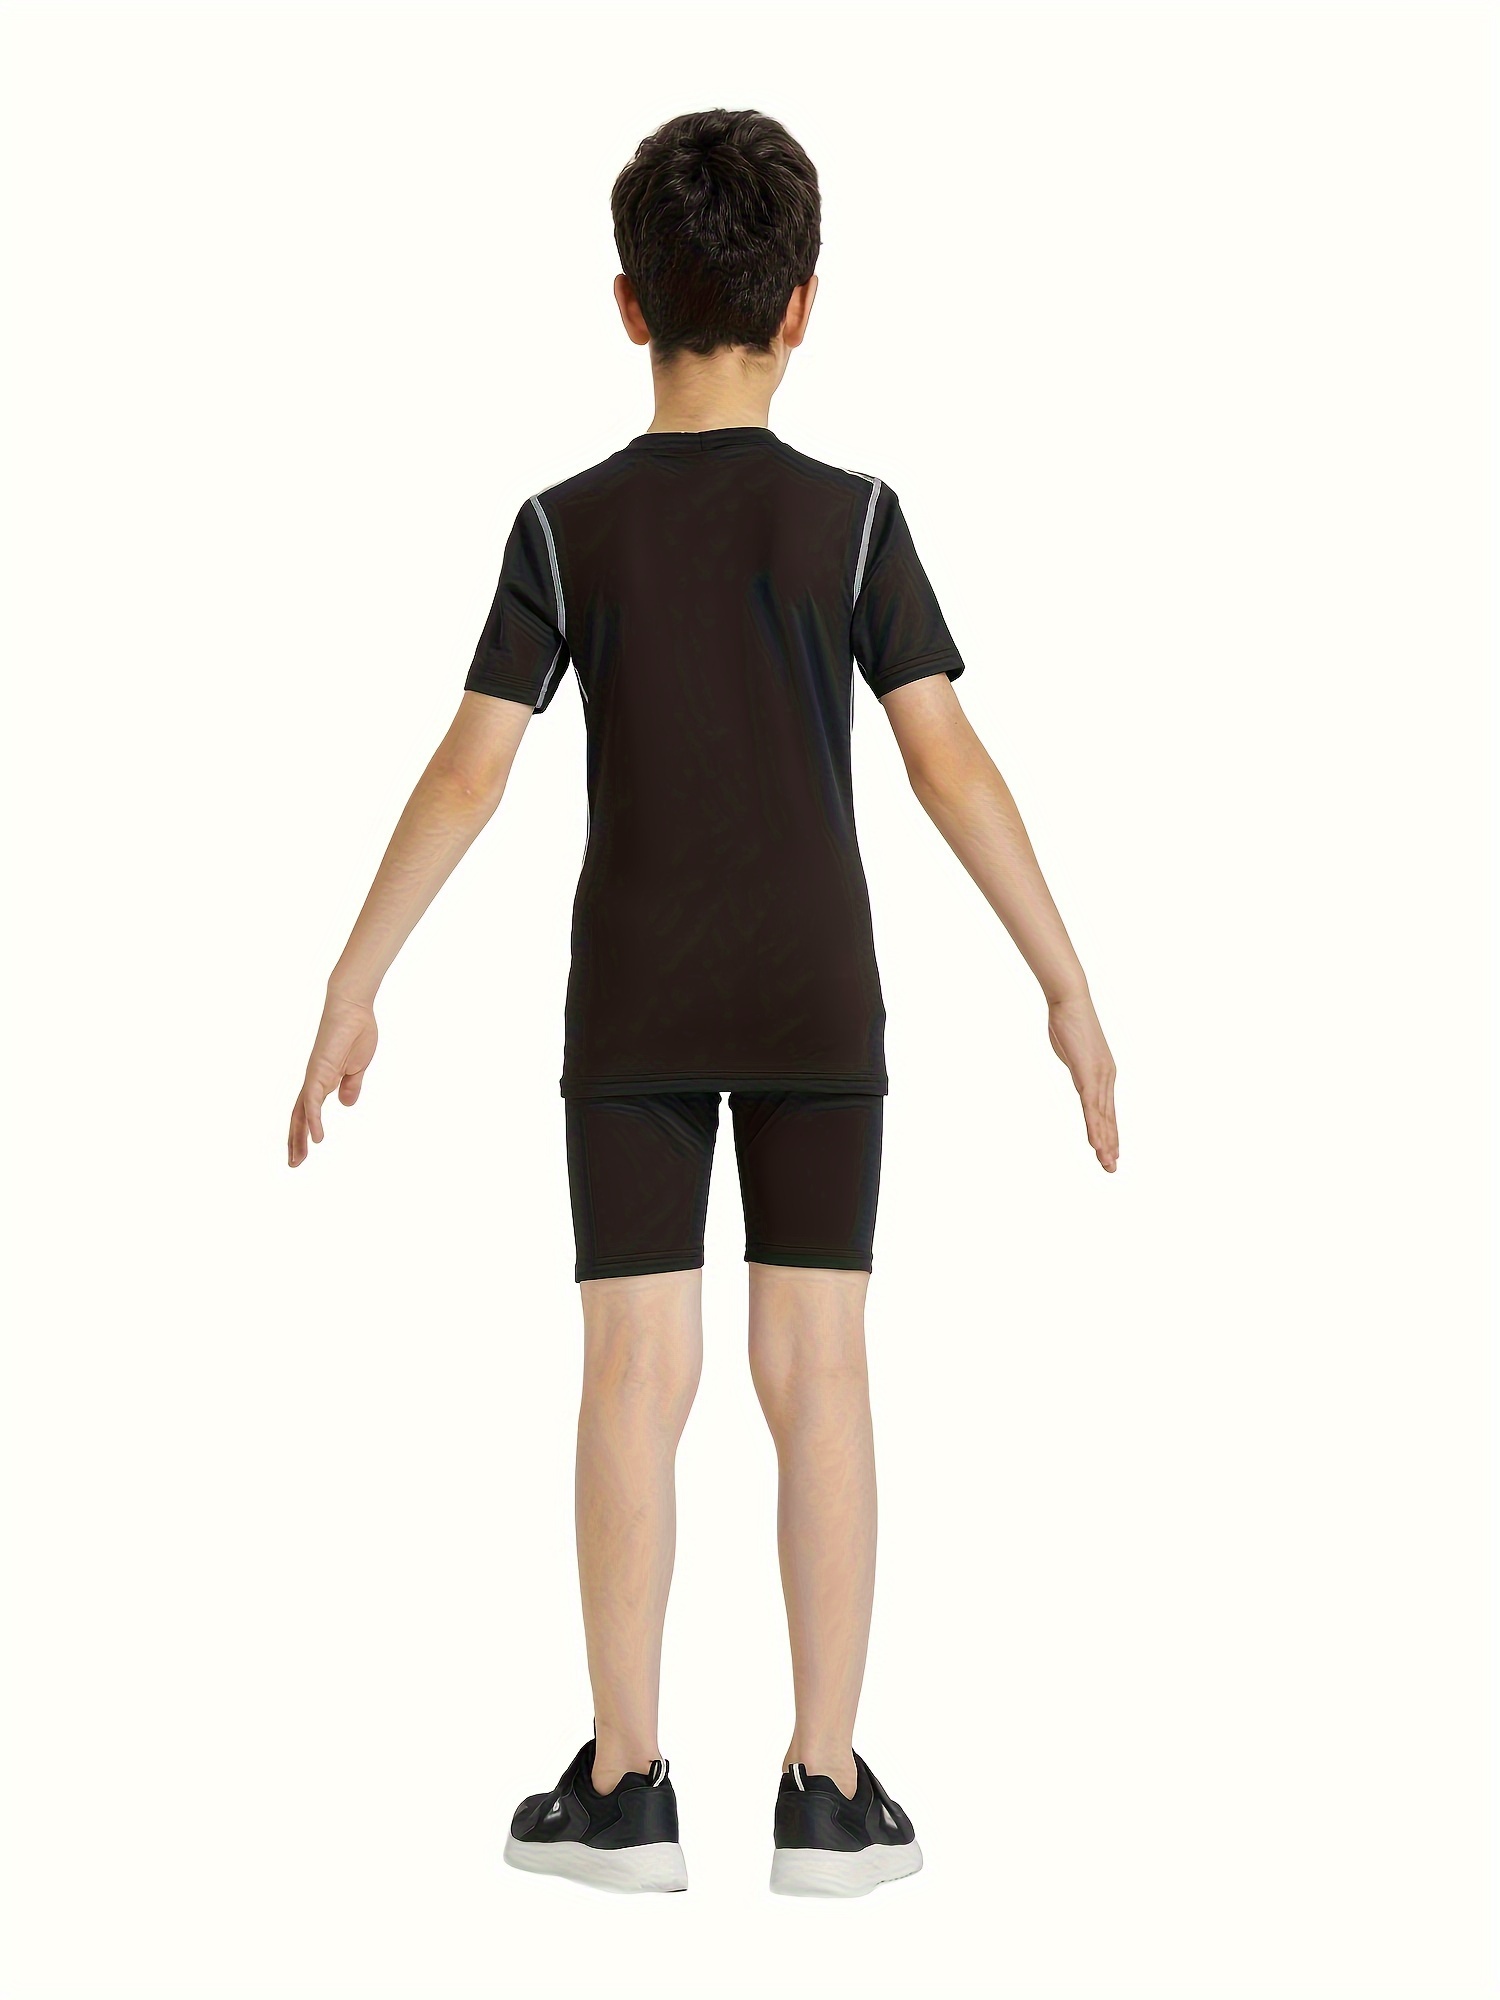 LANBAOSI 2 Pack Boys Athletic Dry Fit Compression Short Sleeve T